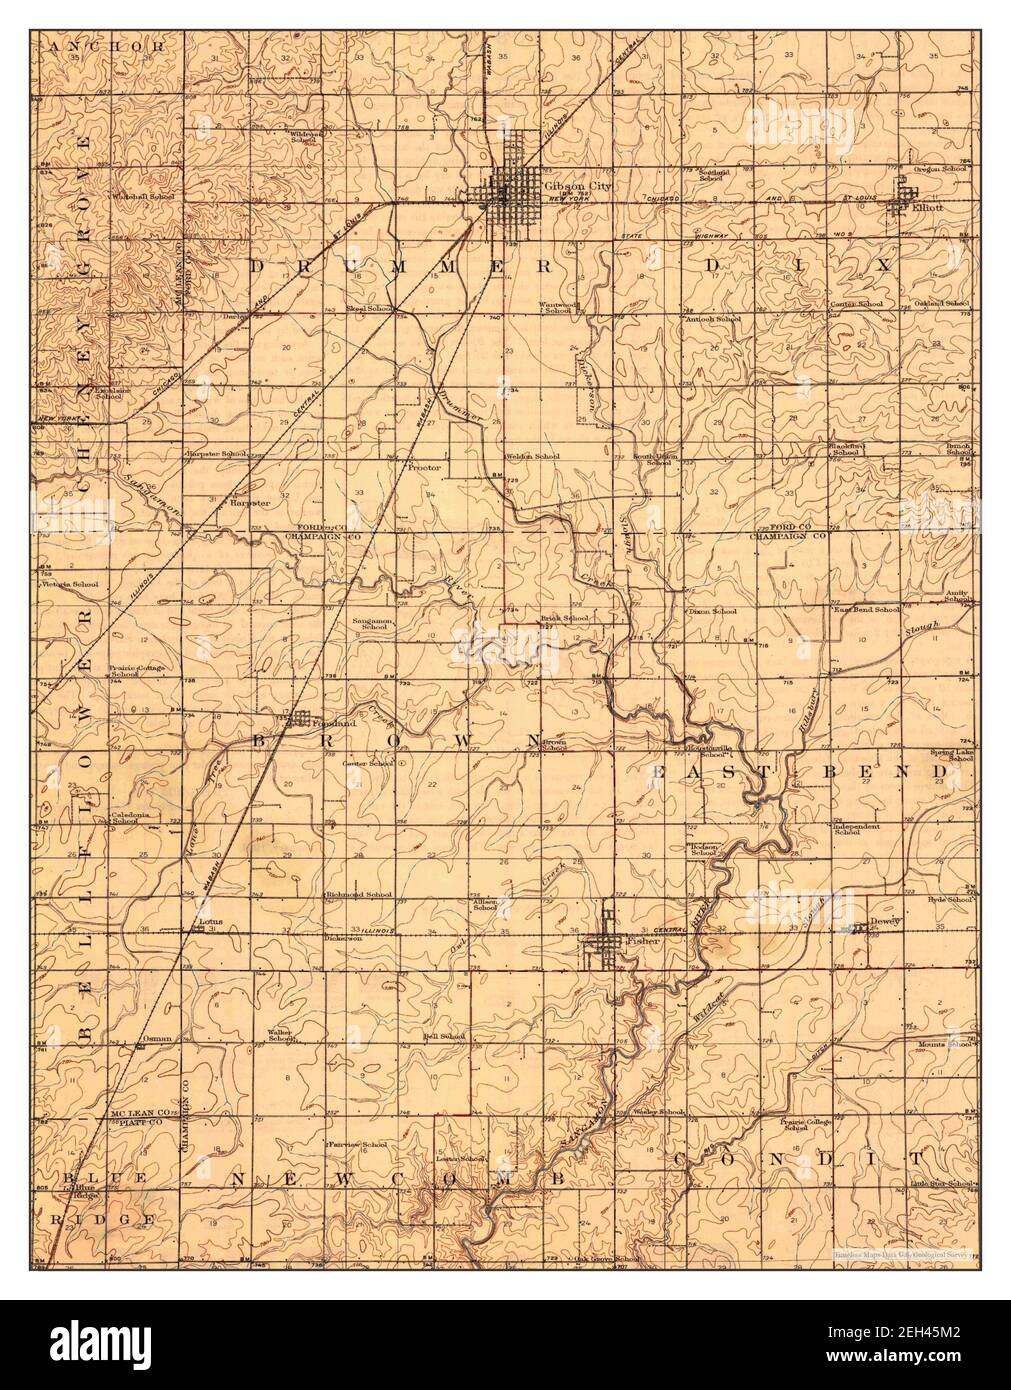 Gibson City, Illinois, map 1928, 1:62500, United States of America by Timeless Maps, data U.S. Geological Survey Stock Photo